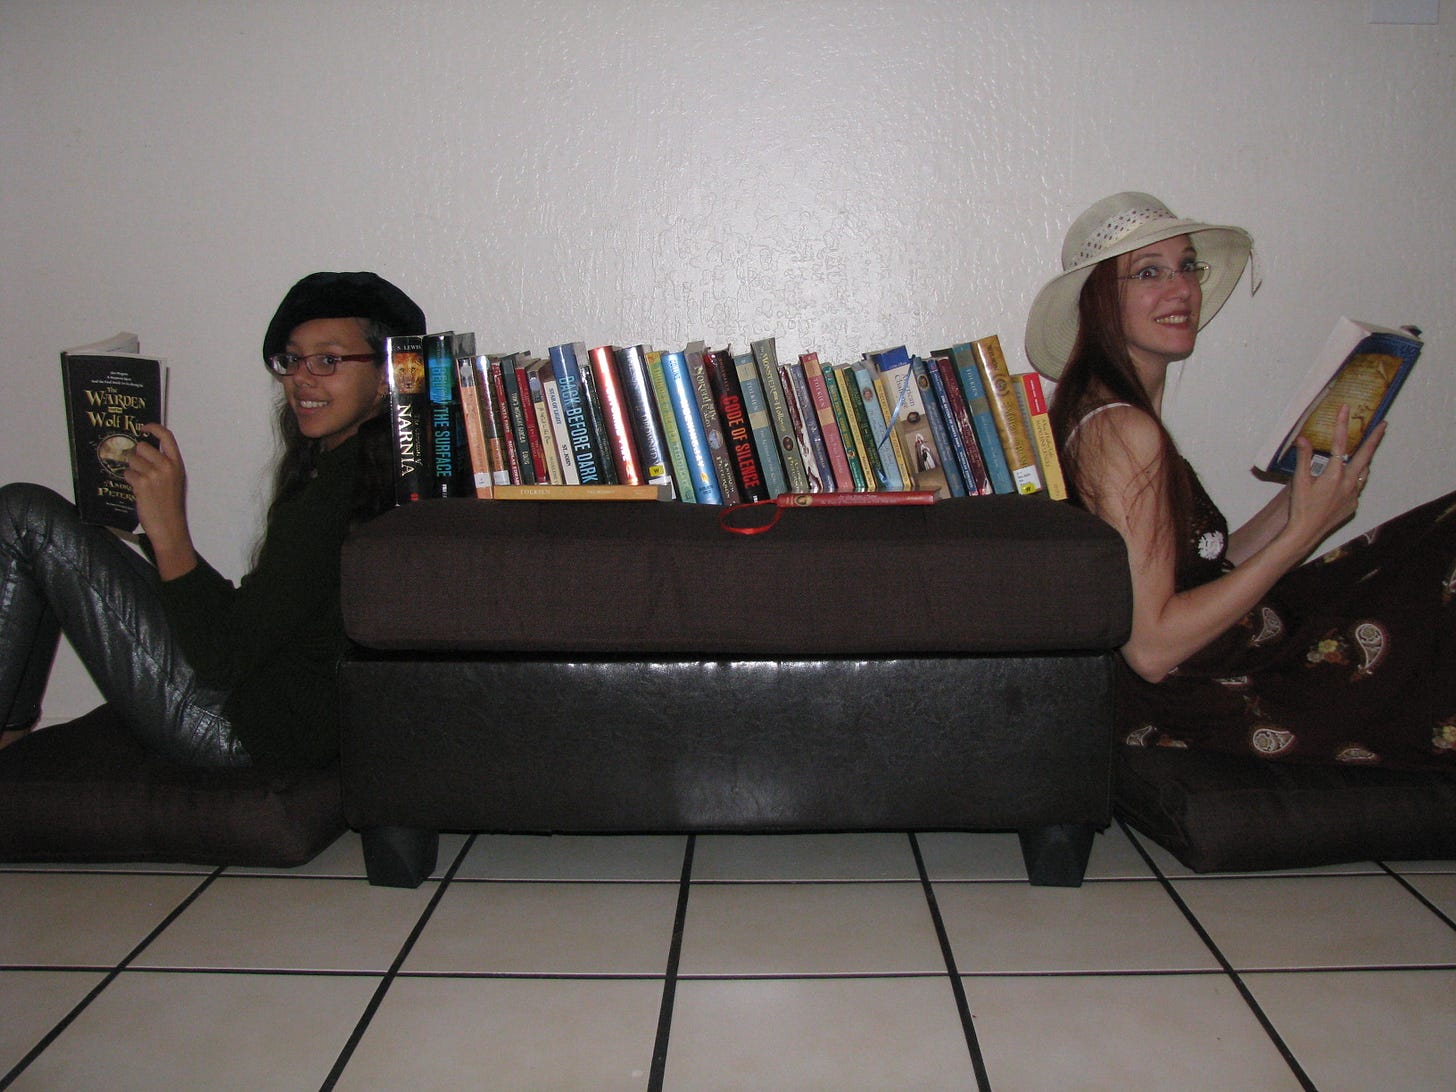 Mother and daughter as "bookends" each reading a book with a row of stories in between